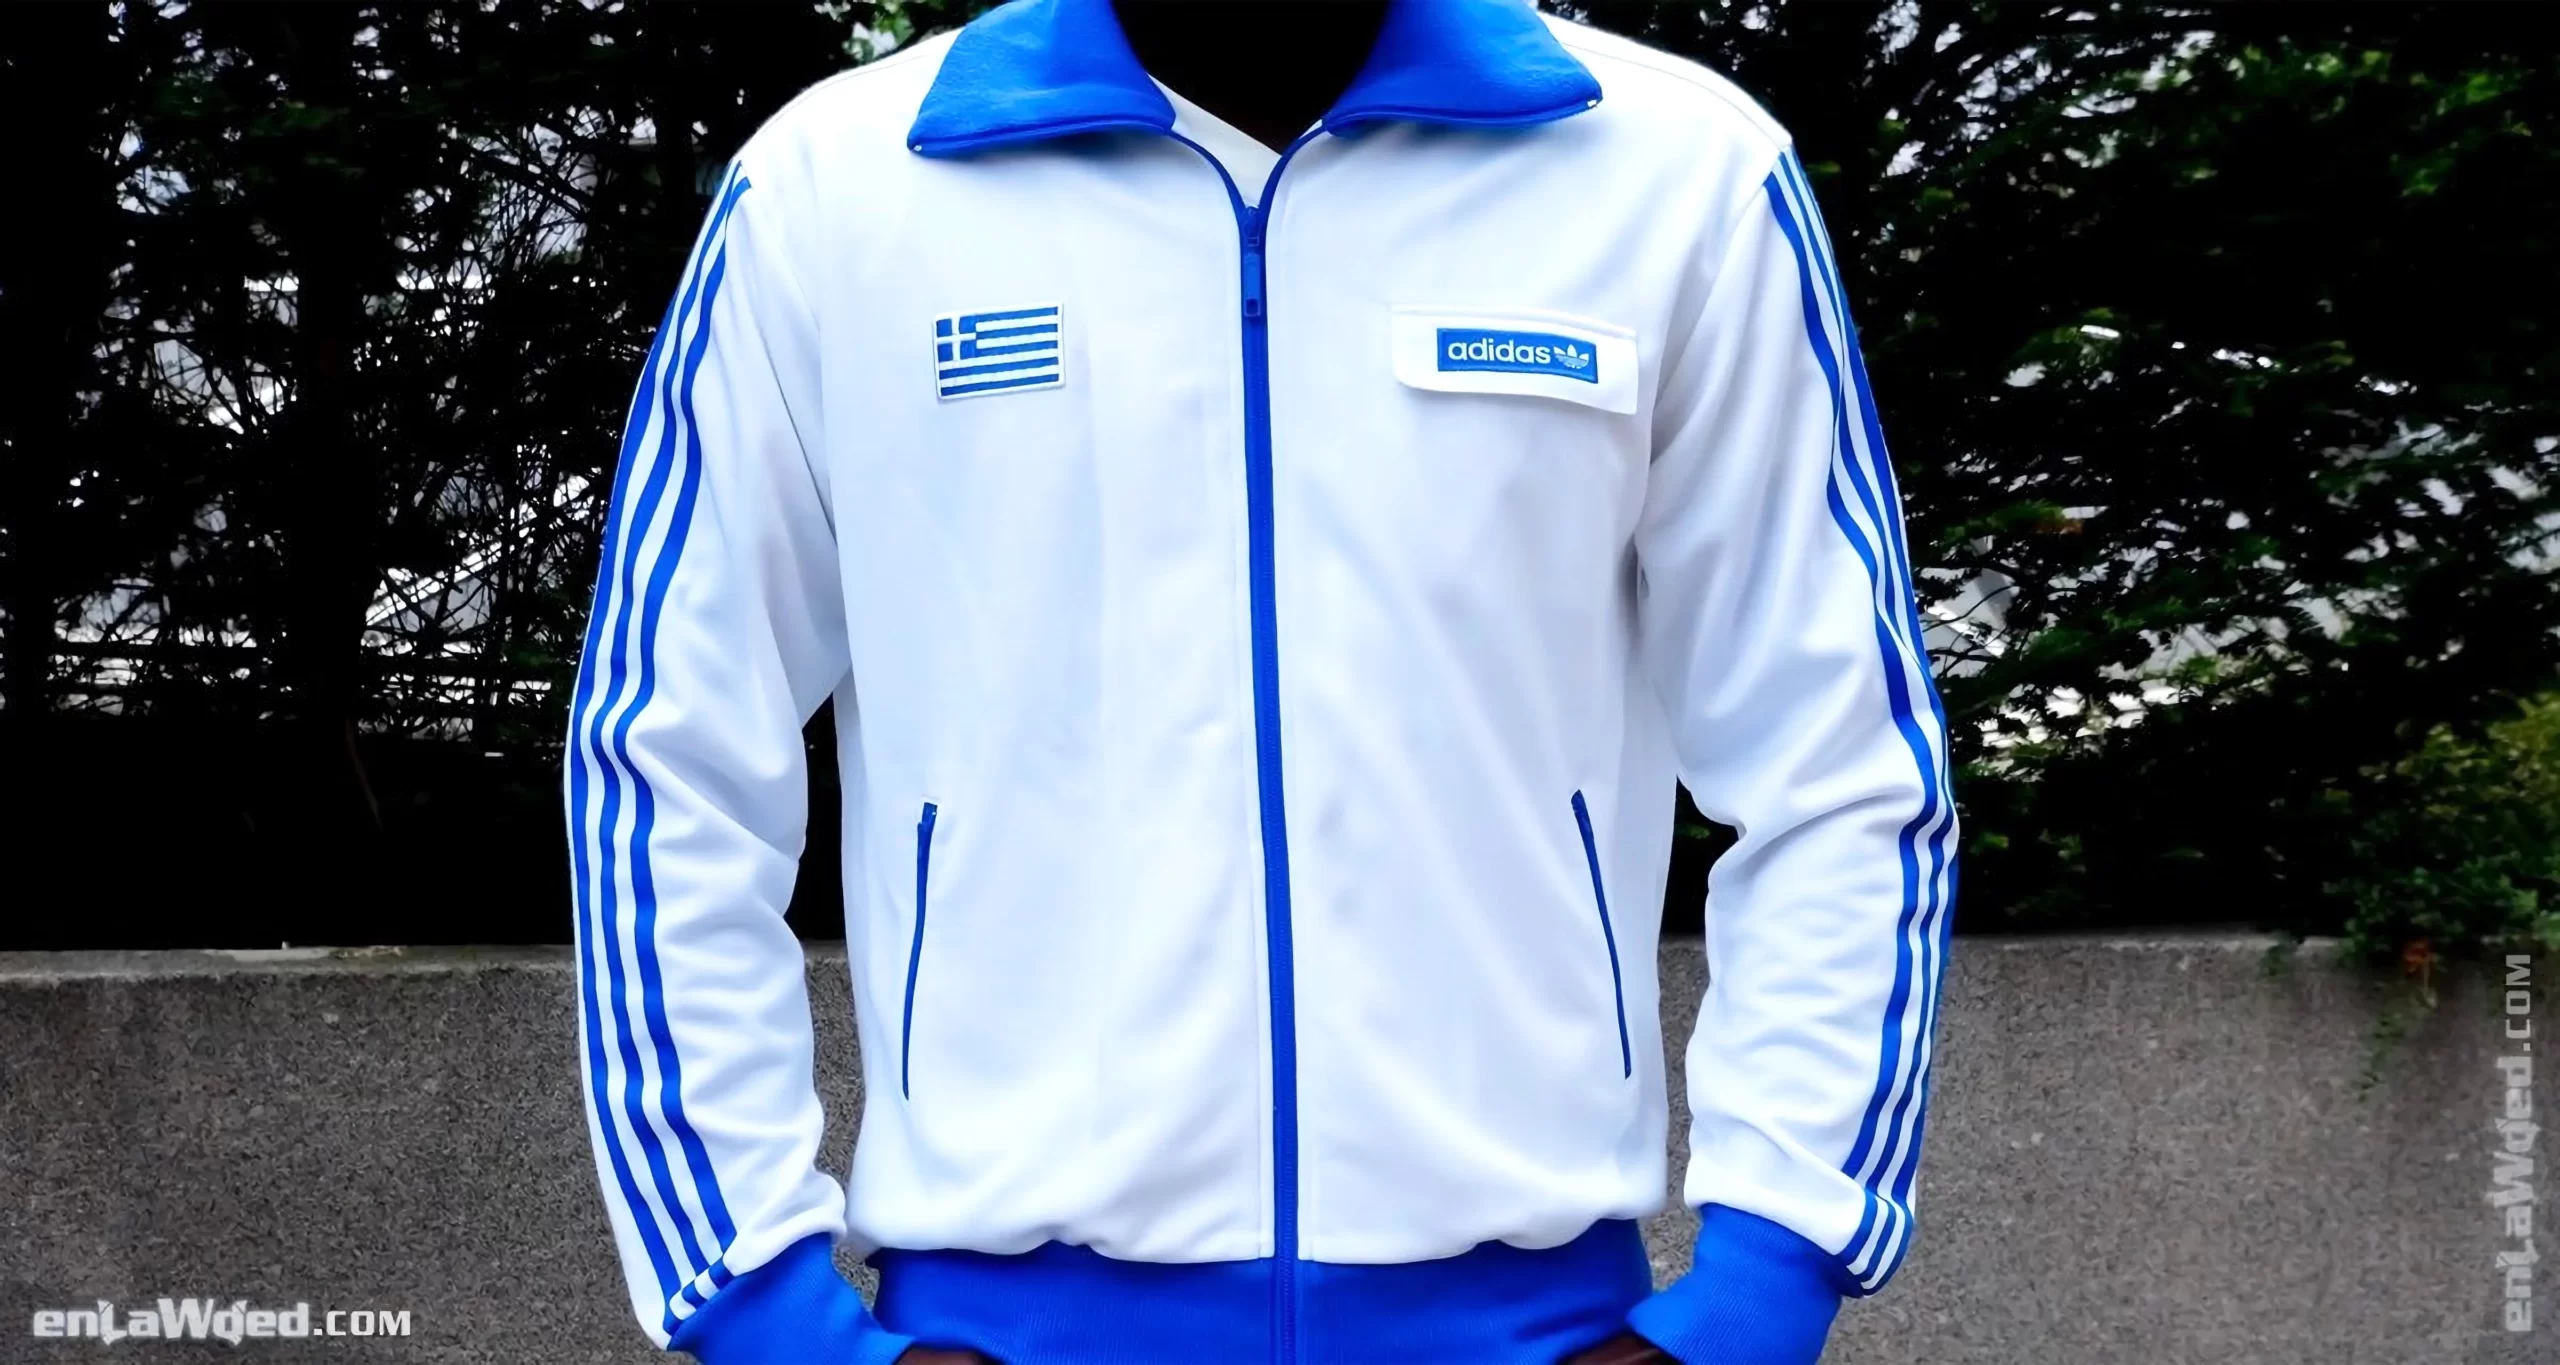 Men’s 2003 Greece Track Top by Adidas: Natural (EnLawded.com file #lmch4zyp00xe7873kt9bg)